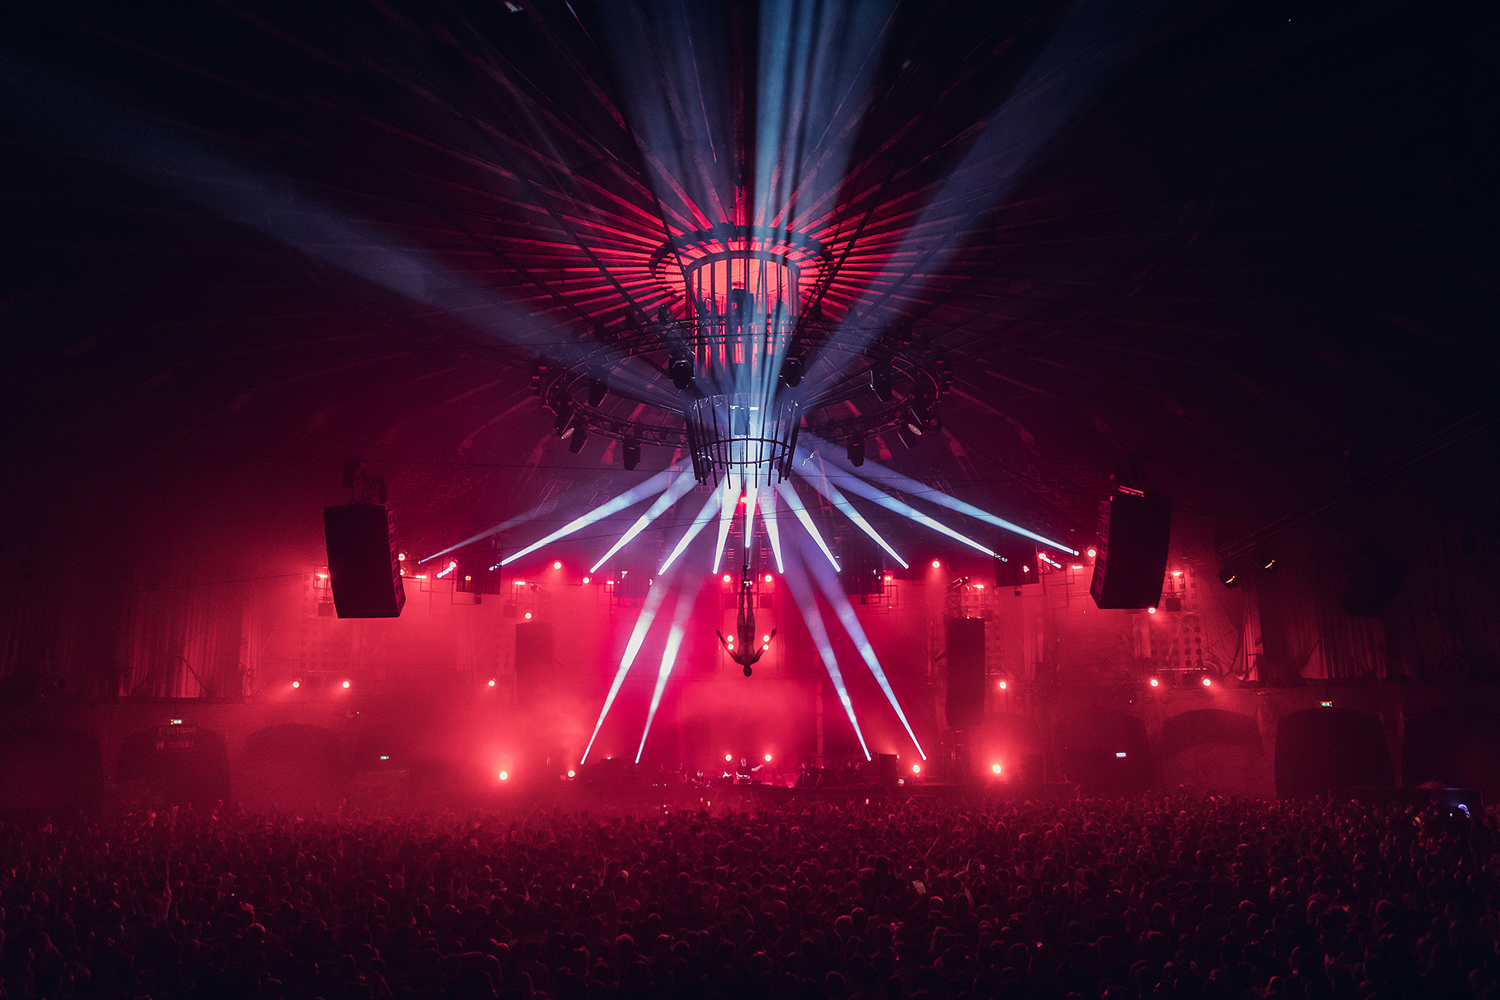 Massive international music festival Afterlife is coming to Dubai